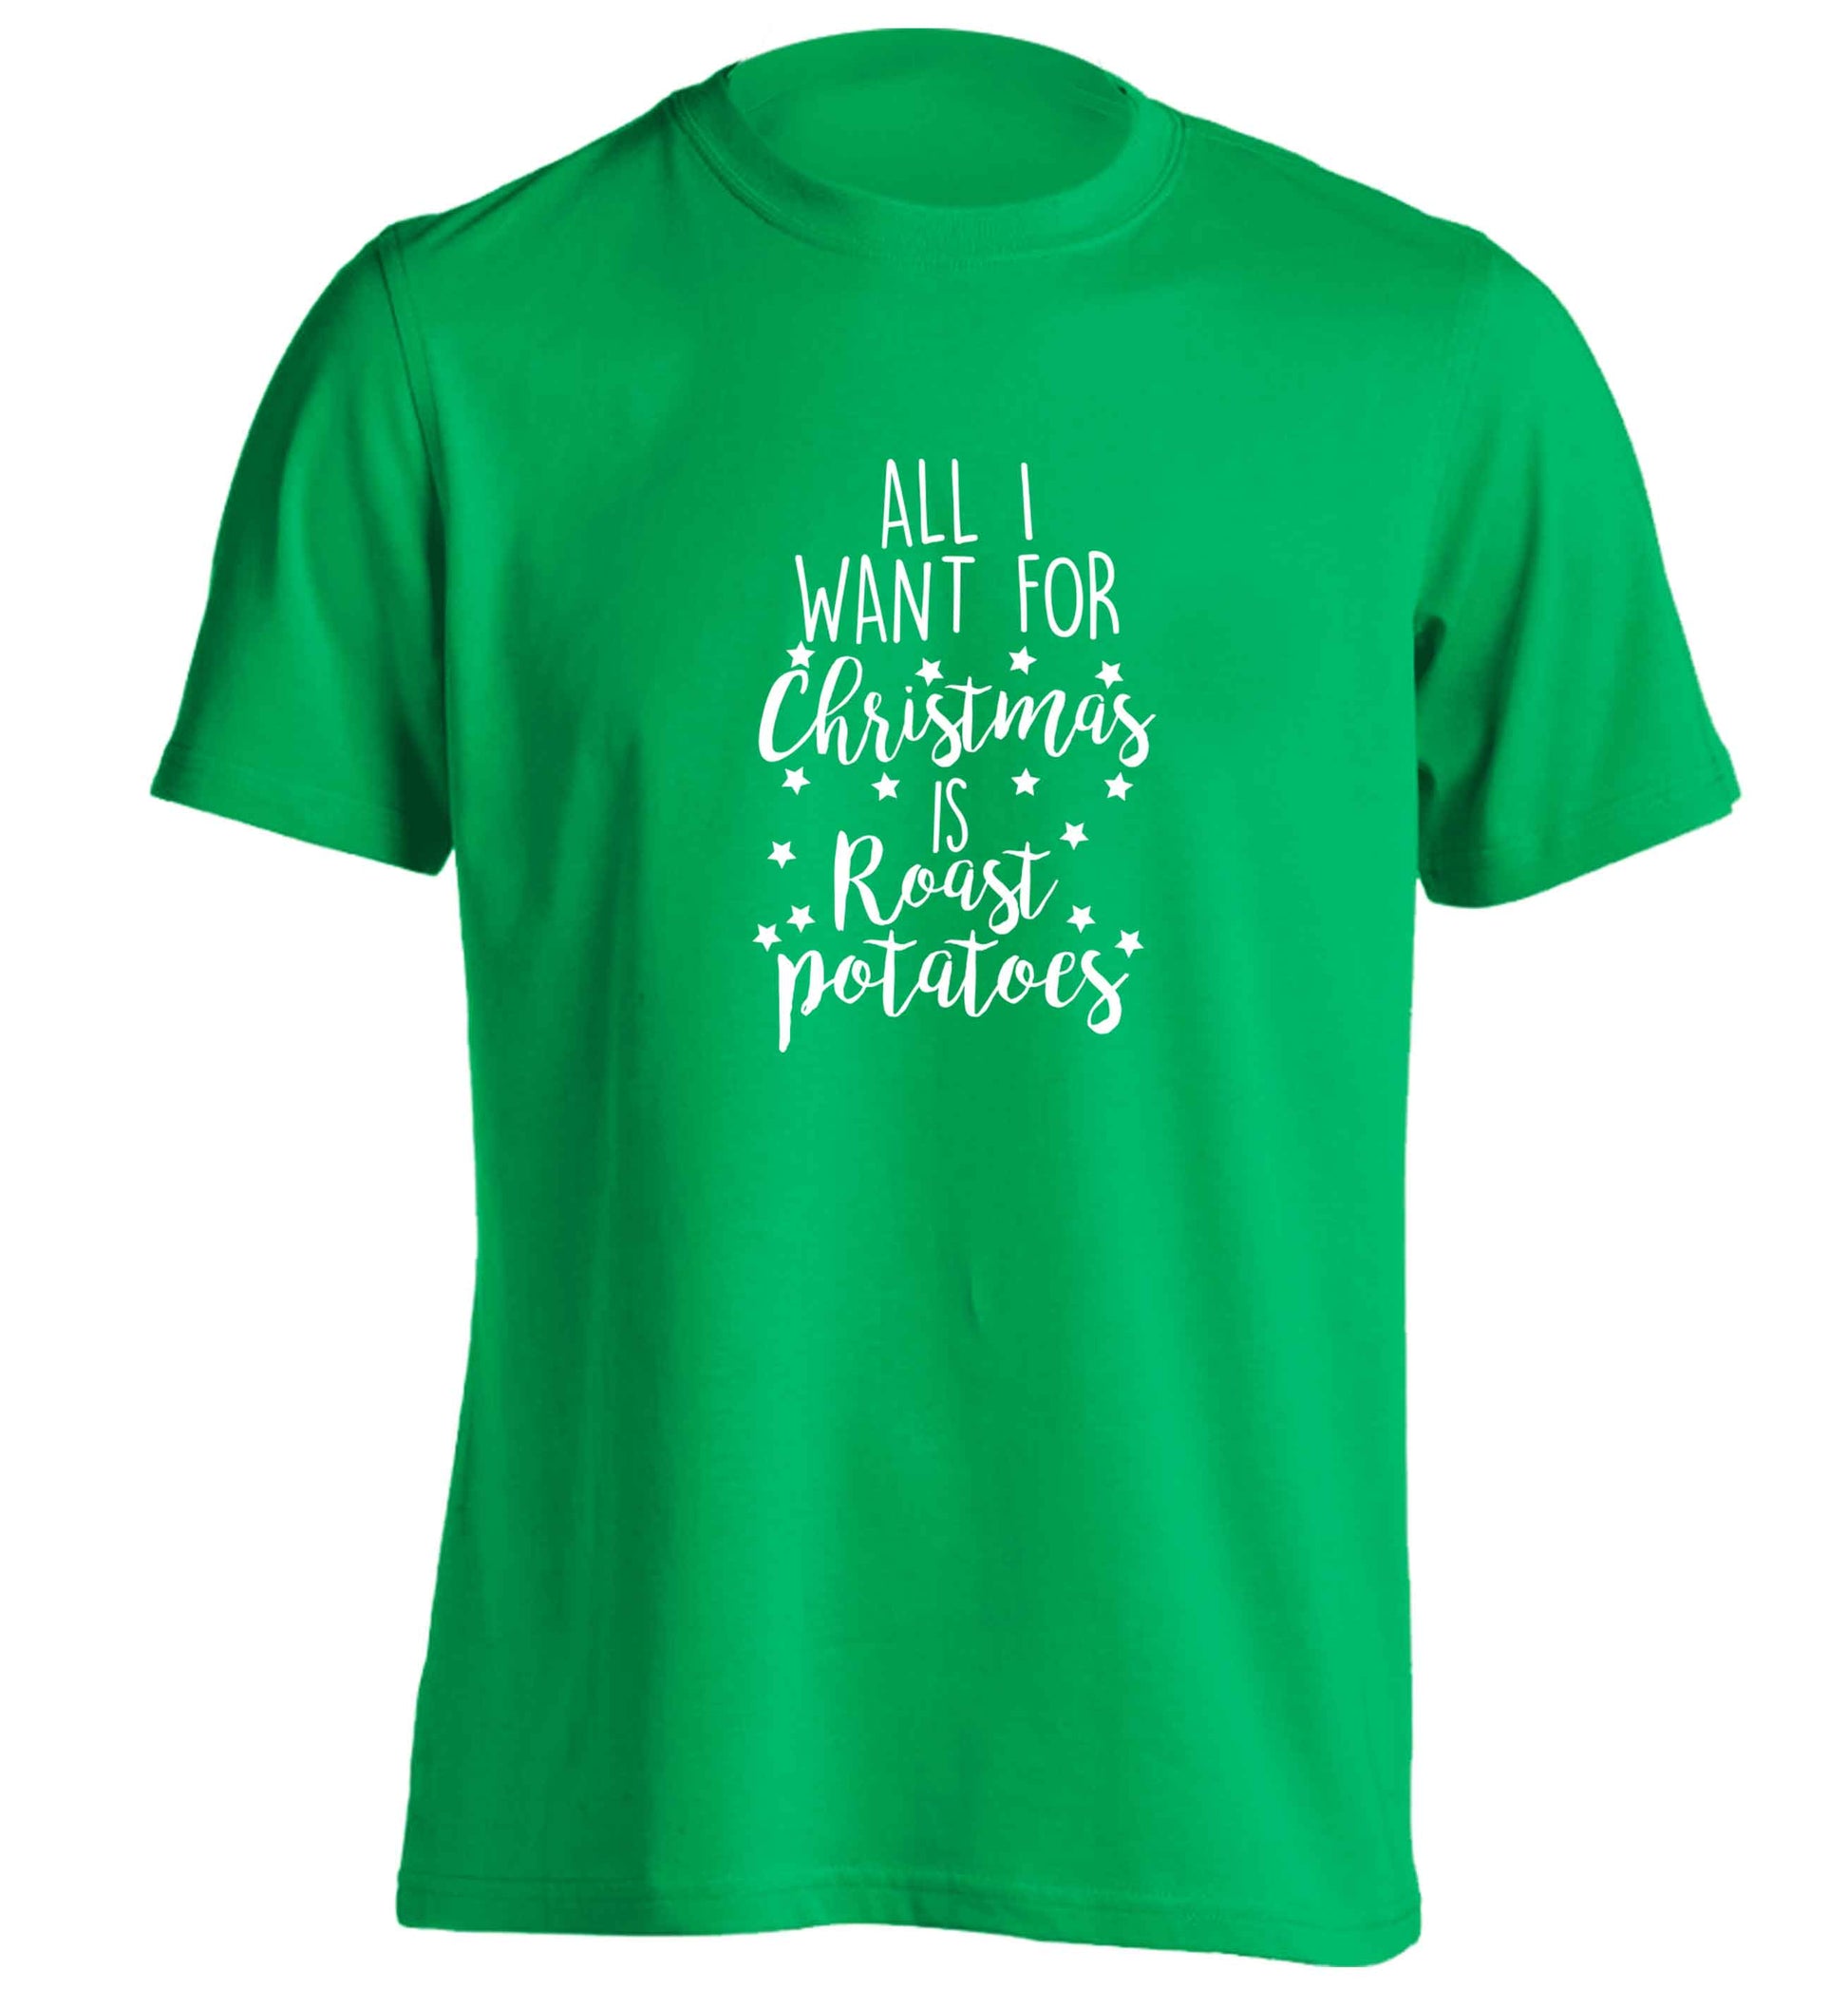 All I want for Christmas is roast potatoes adults unisex green Tshirt 2XL